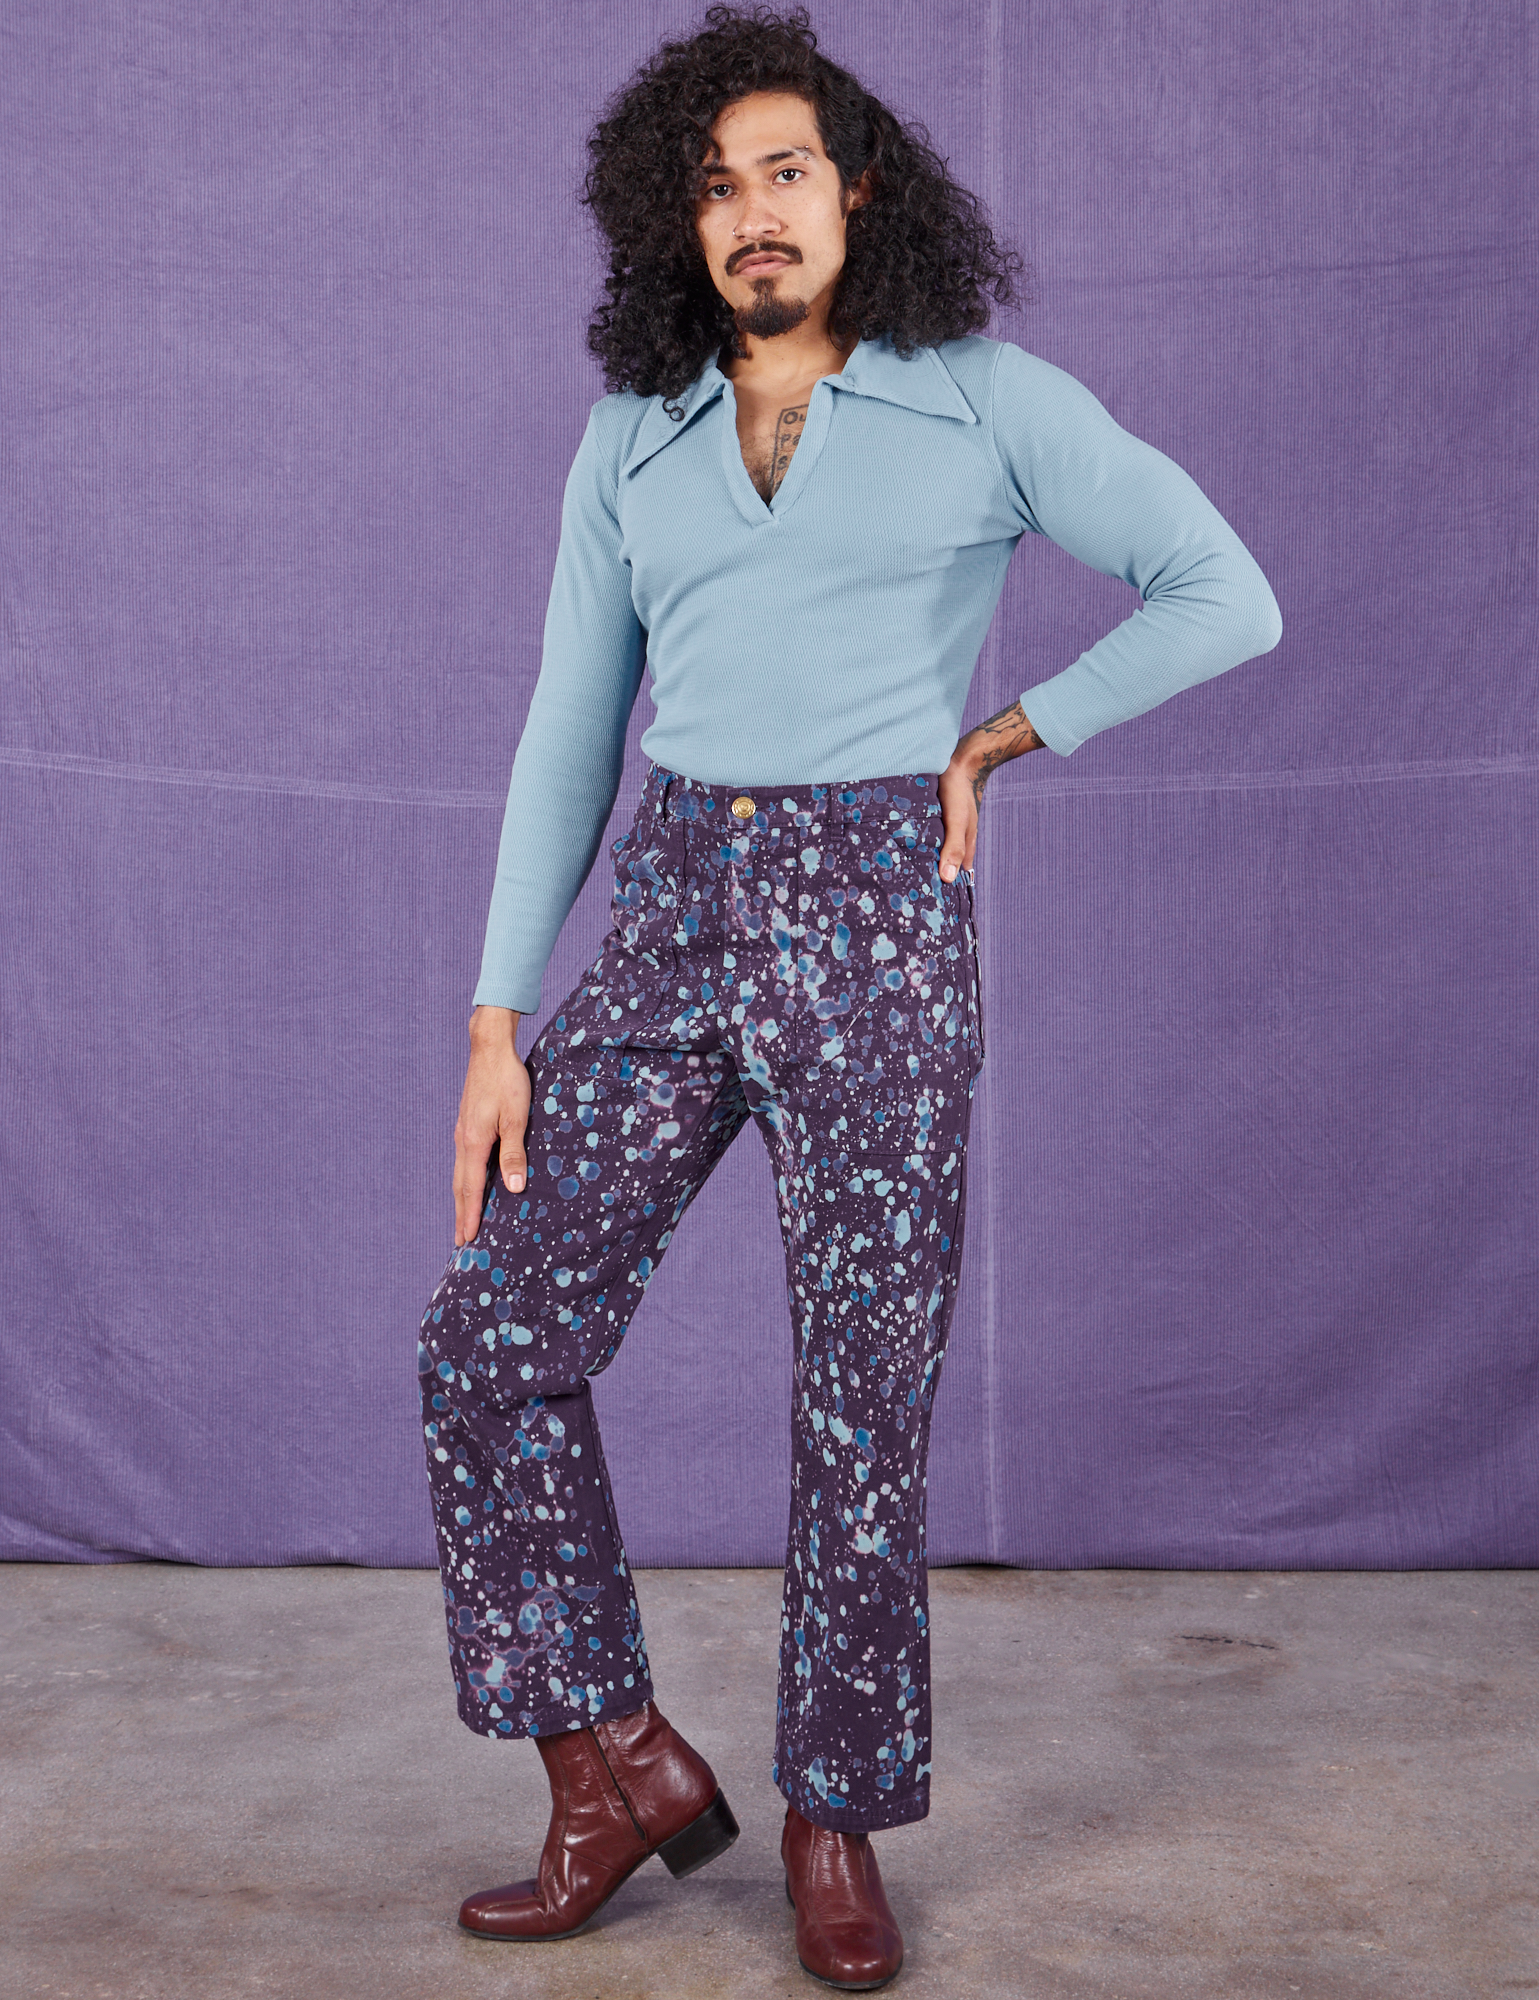 Jesse is 5'8" and wearing XS Marble Splatter Work Pants in Nebula Purple paired with baby blue Long Sleeve Fisherman Polo